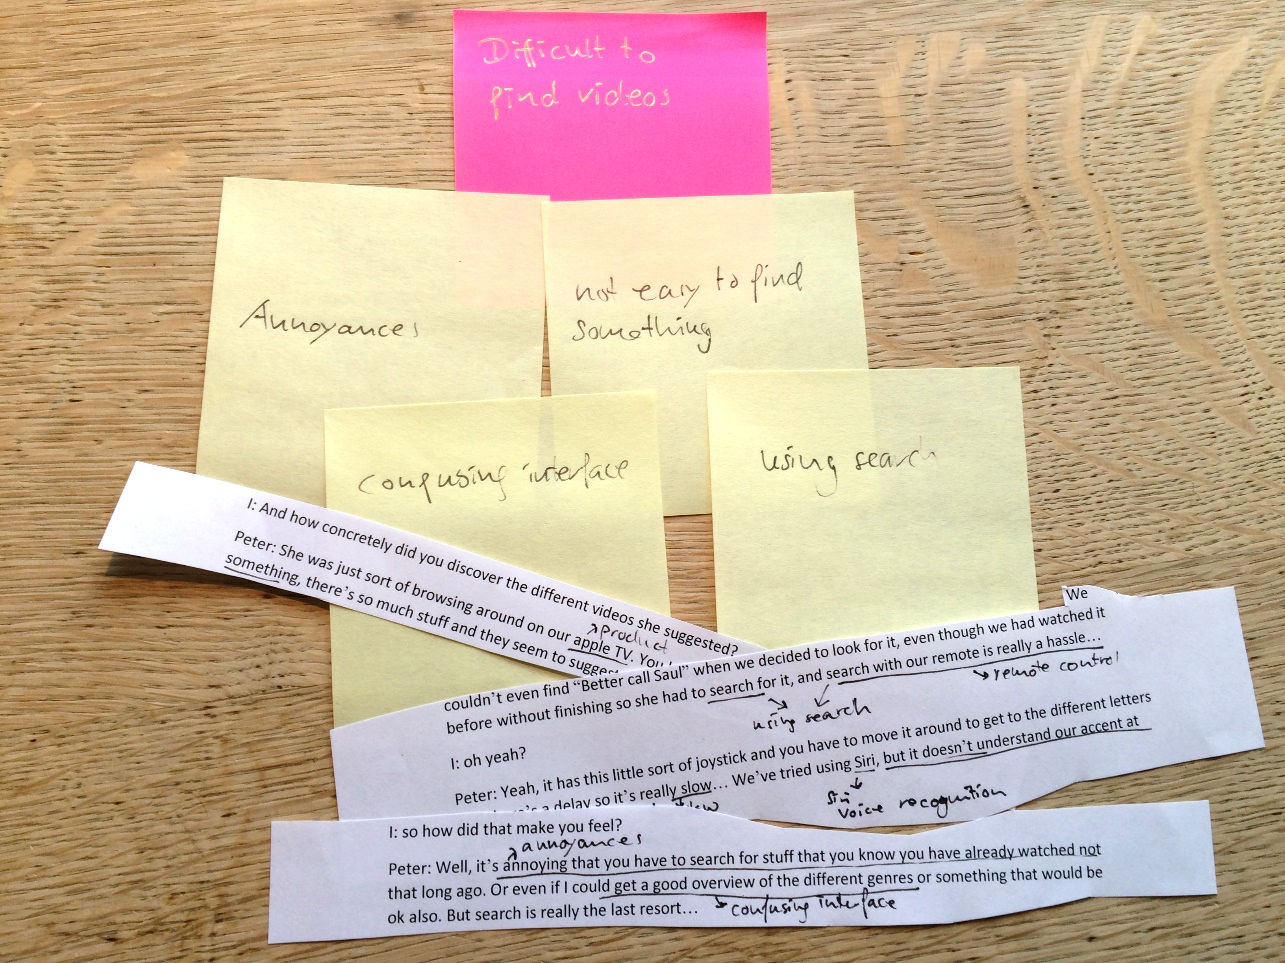 Sticky notes with themes along with snippets cut out from transcript.